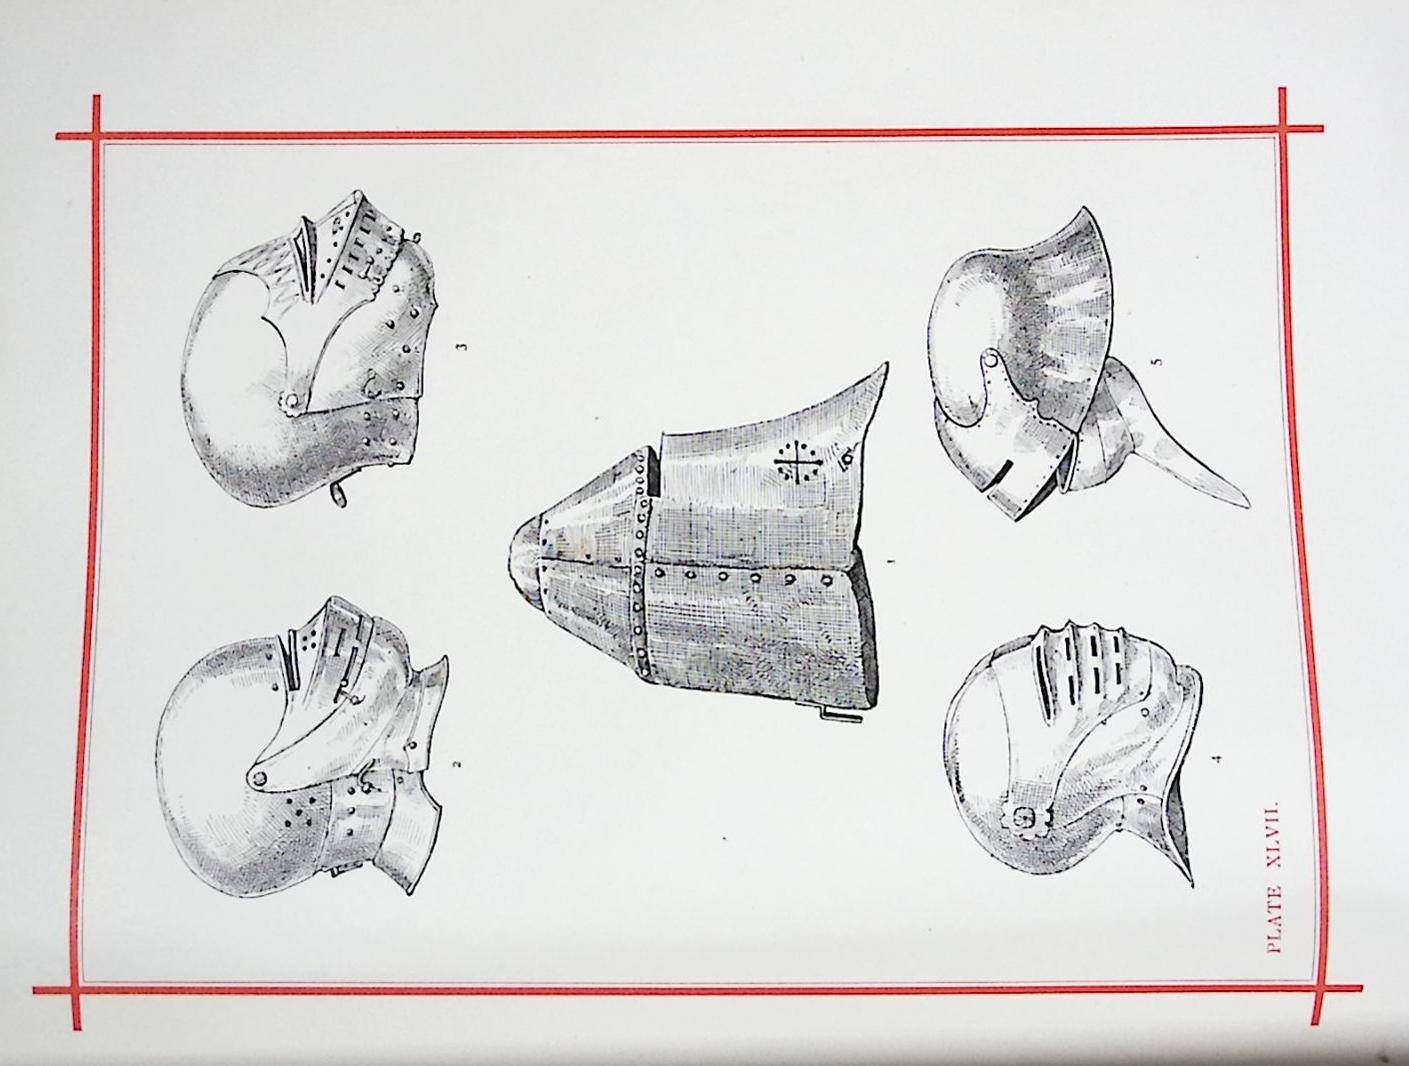 A Pictorial and Descriptive Record of the Origin and Development of Arms and Armour.To which are Appended 133 Plates Specially Drawn from the Author's Collection at Oaklands, St. Peter's, Thanet, and Burleigh House, London.